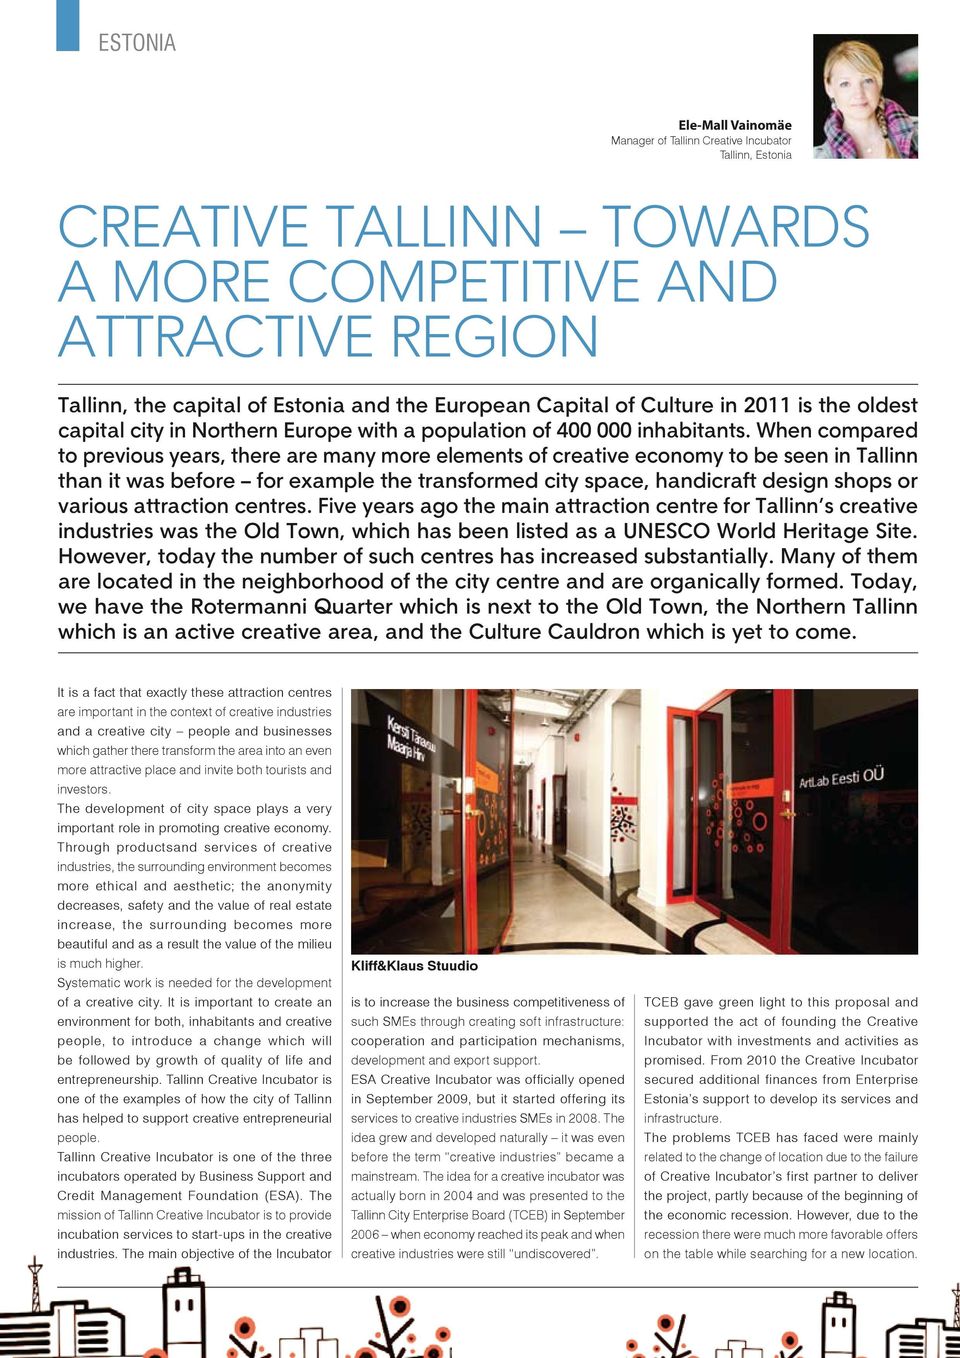 When compared to previous years, there are many more elements of creative economy to be seen in Tallinn than it was before for example the transformed city space, handicraft design shops or various